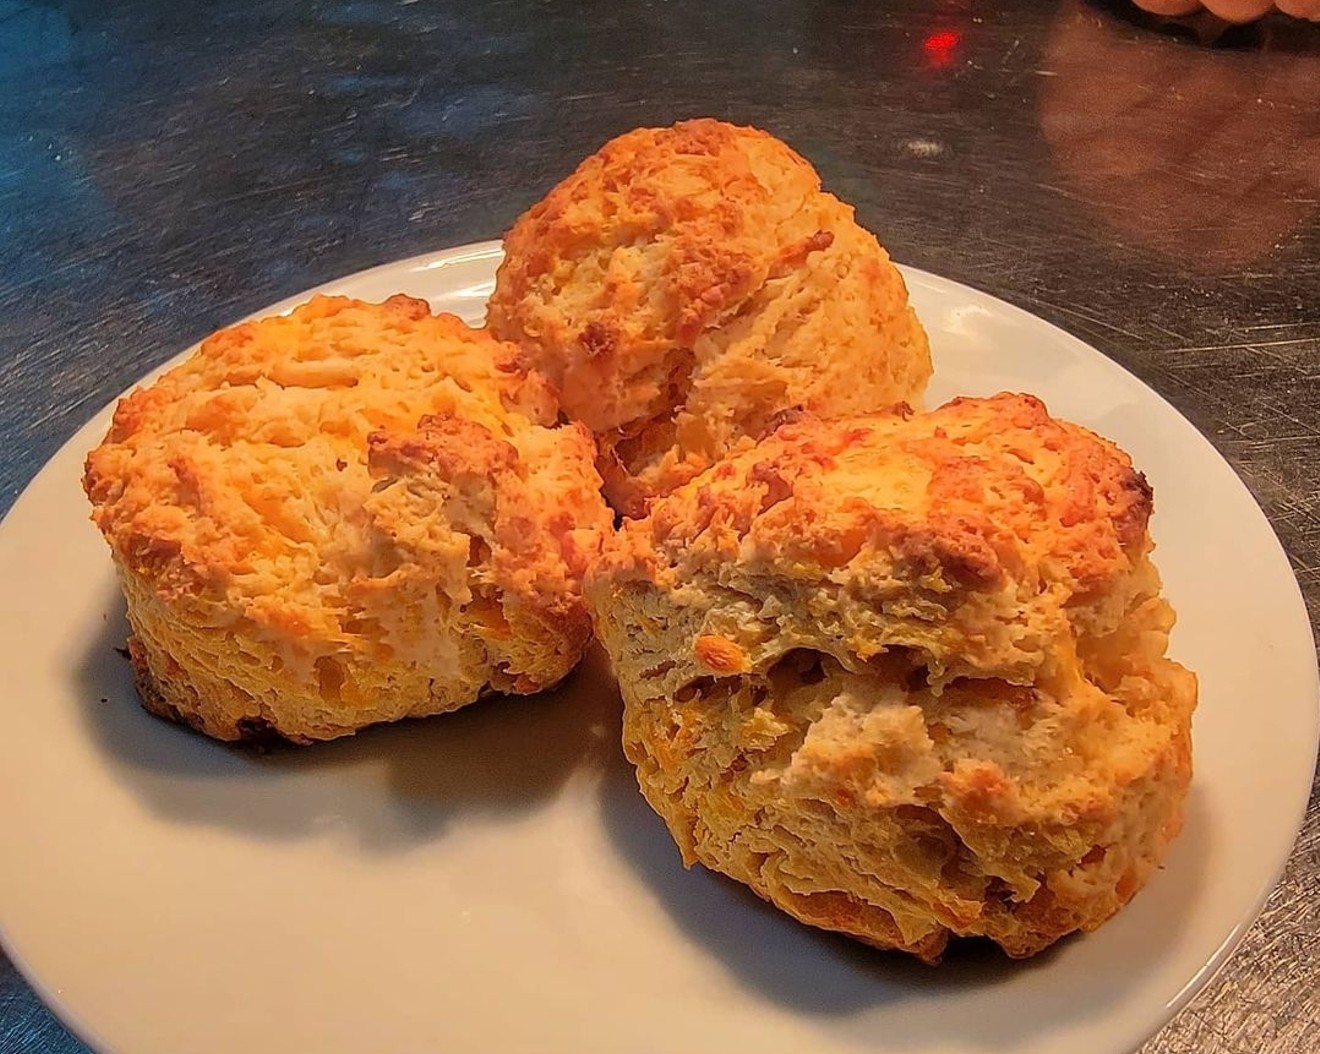 These biscuits from Josh Farrell's recipe require a lot of cold to rise properly, but look at those layers.